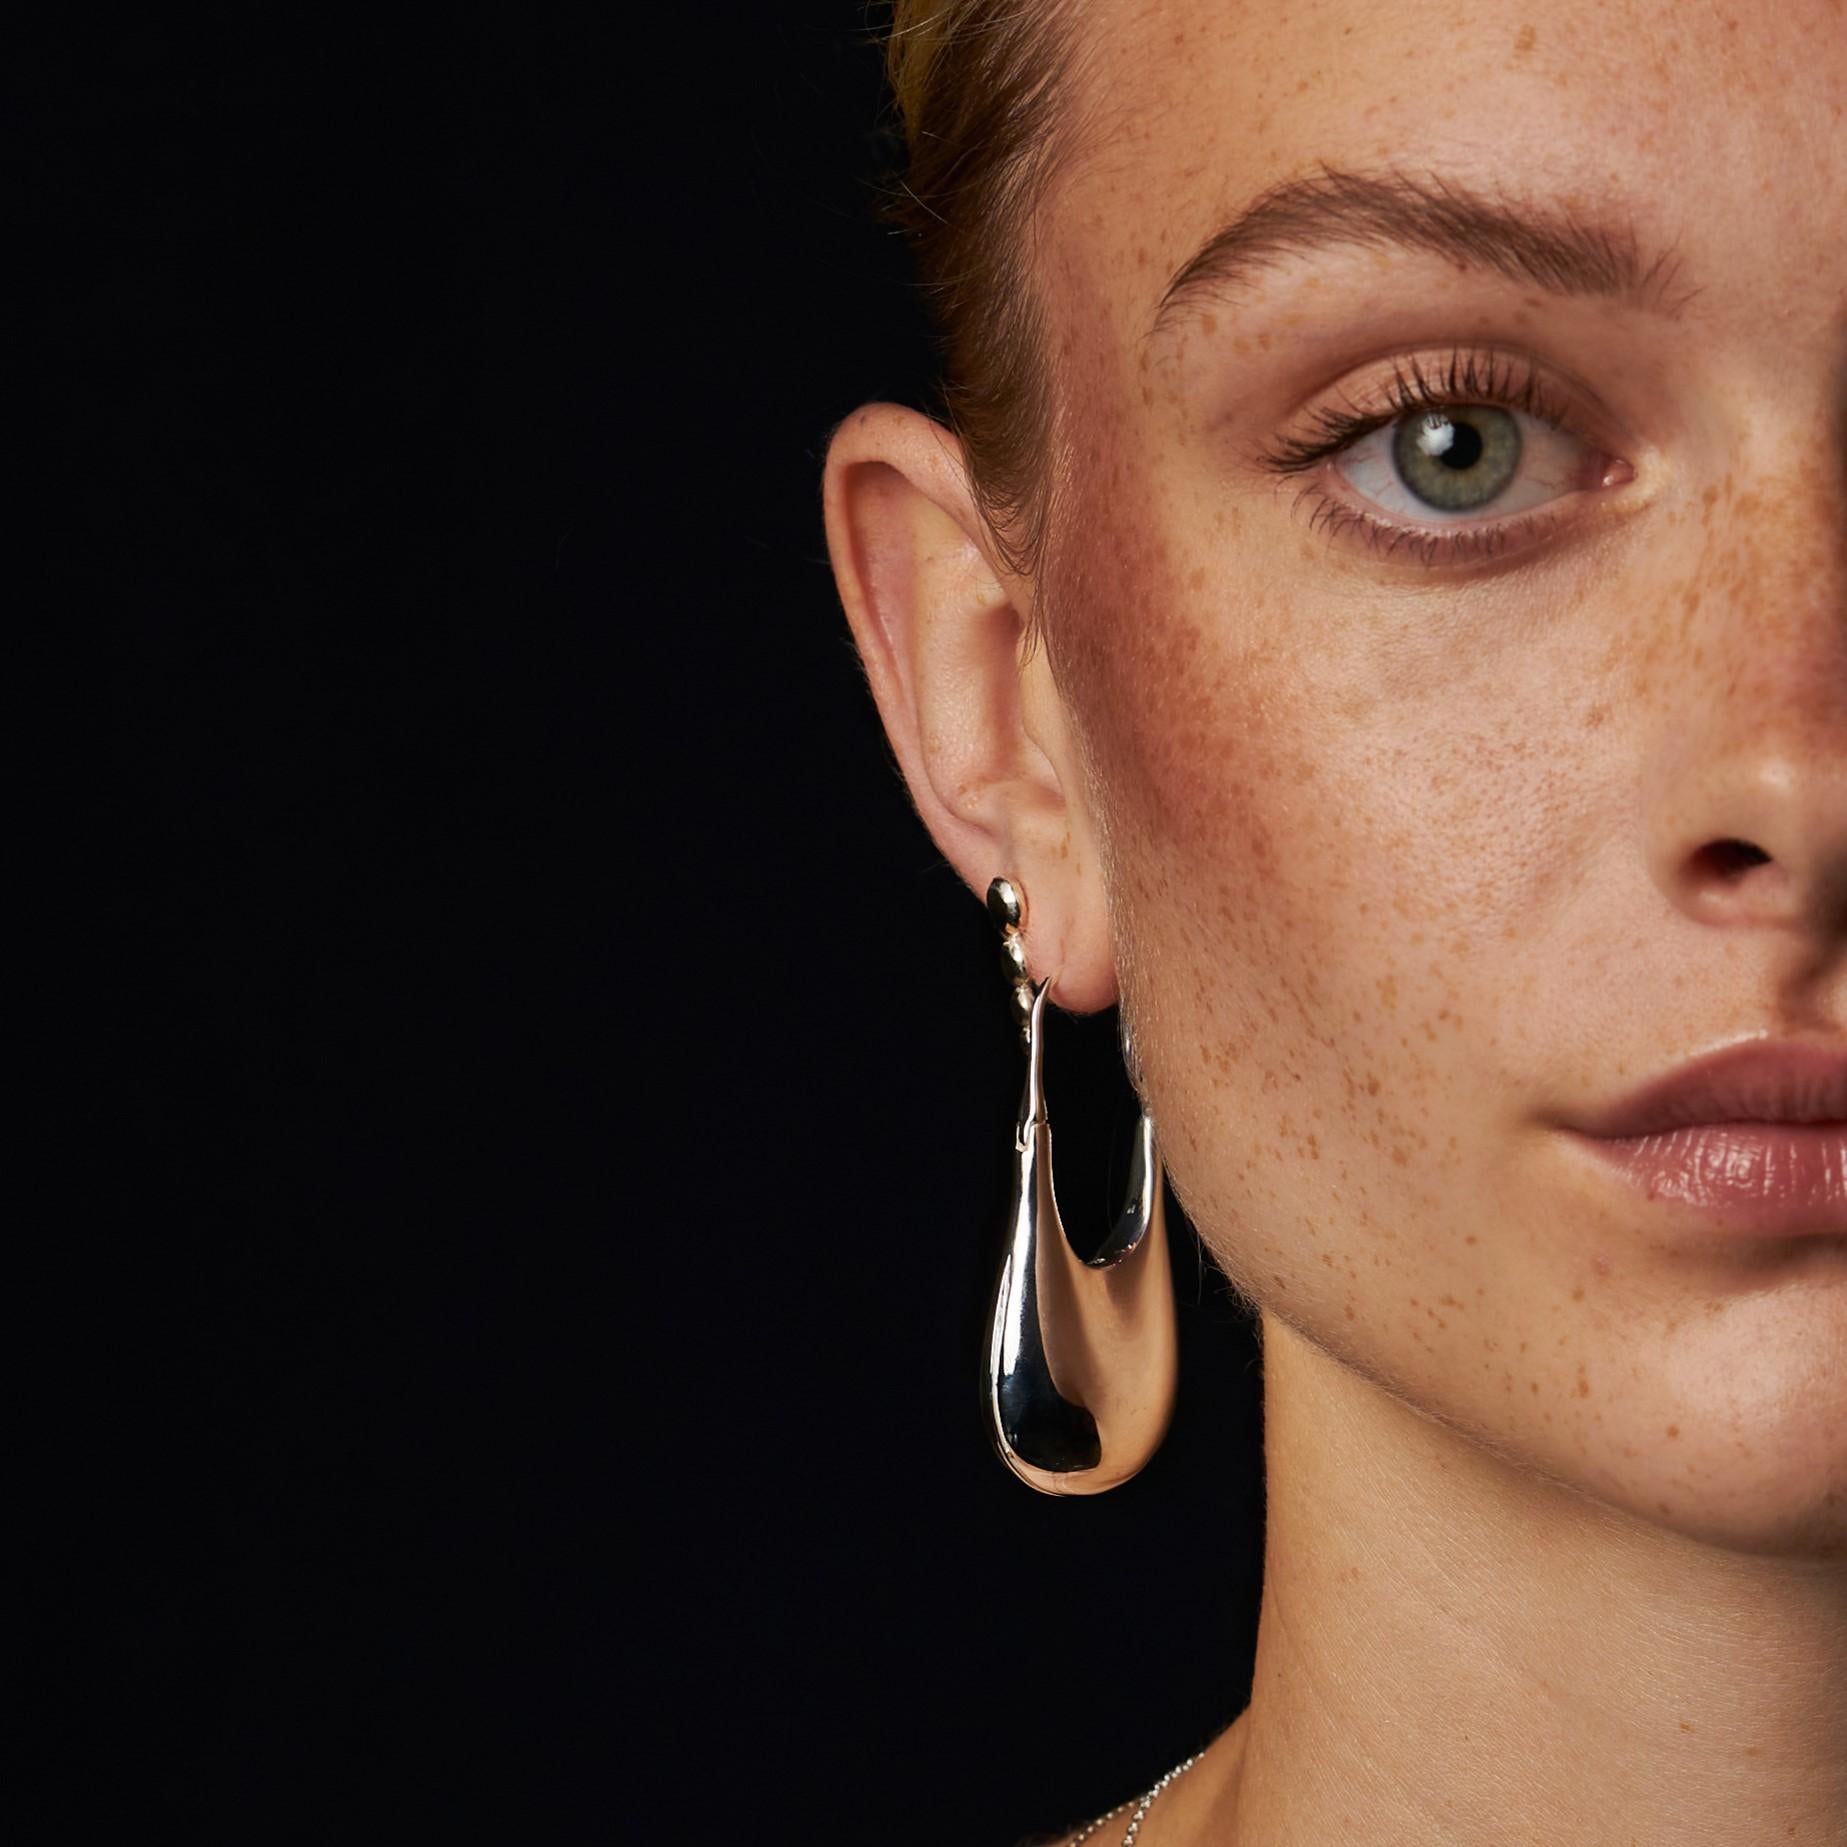 Also available in recycled 18k gold, sterling silver with MPINGO Blackwood, as well as in small size.

Experience the original and iconic light weight drop earring with a gravity-defying look, featuring an intricate hollow corpus developed by